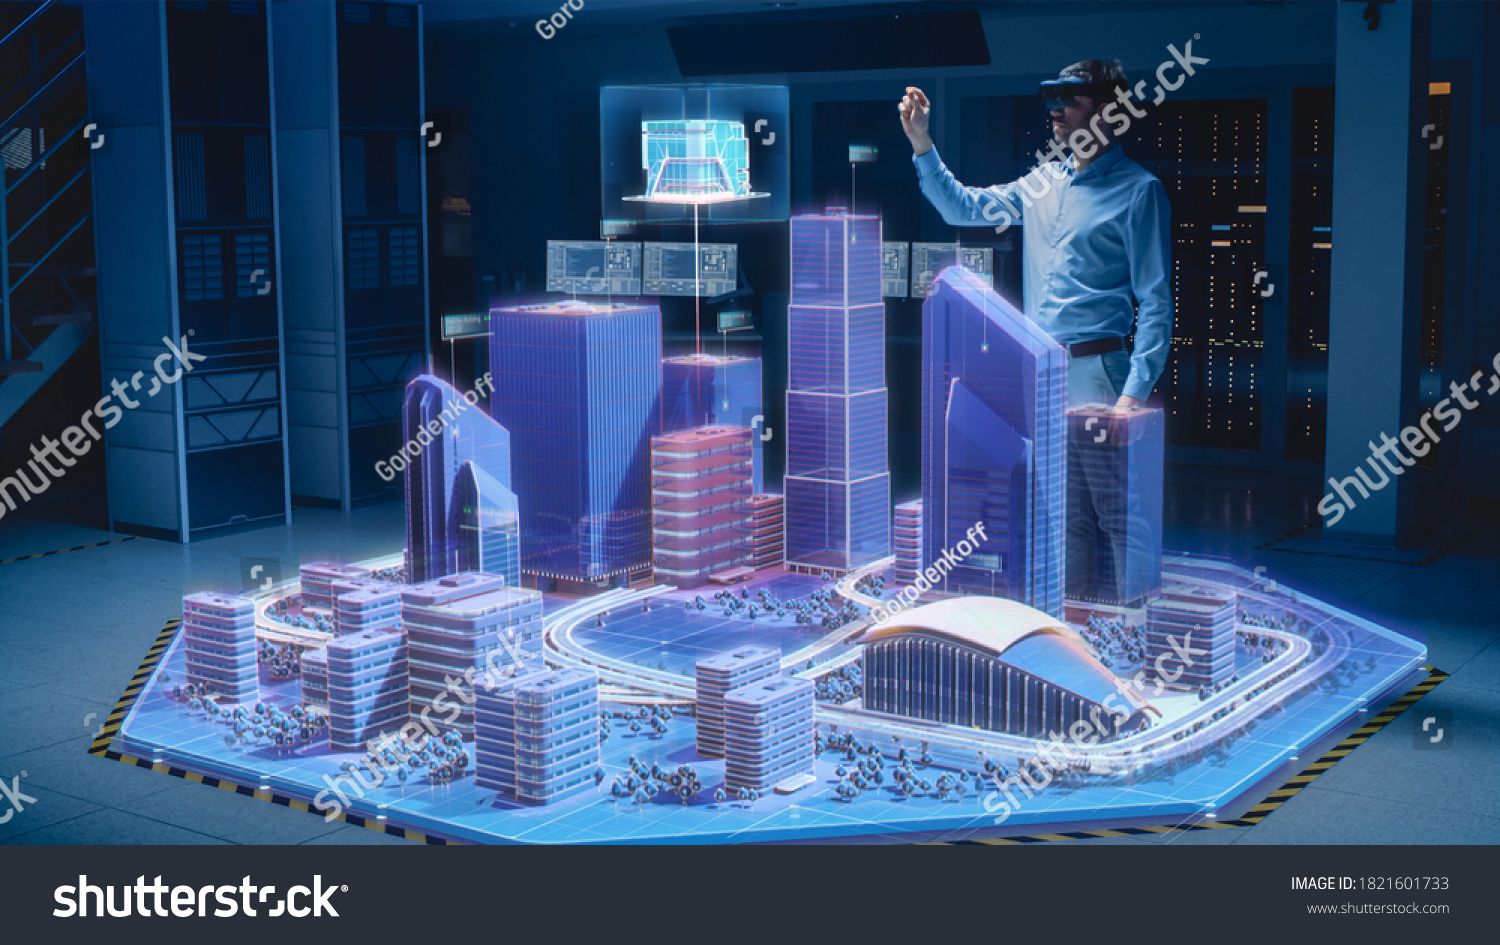 Industry 4.0: Modern Professional Architect Wearing Virtual Reality Headset Uses Gestures to Design, Manipulate Buildings for 3D City. Mixed Augmented Reality Software. VFX Special Visual Effect #1821601733